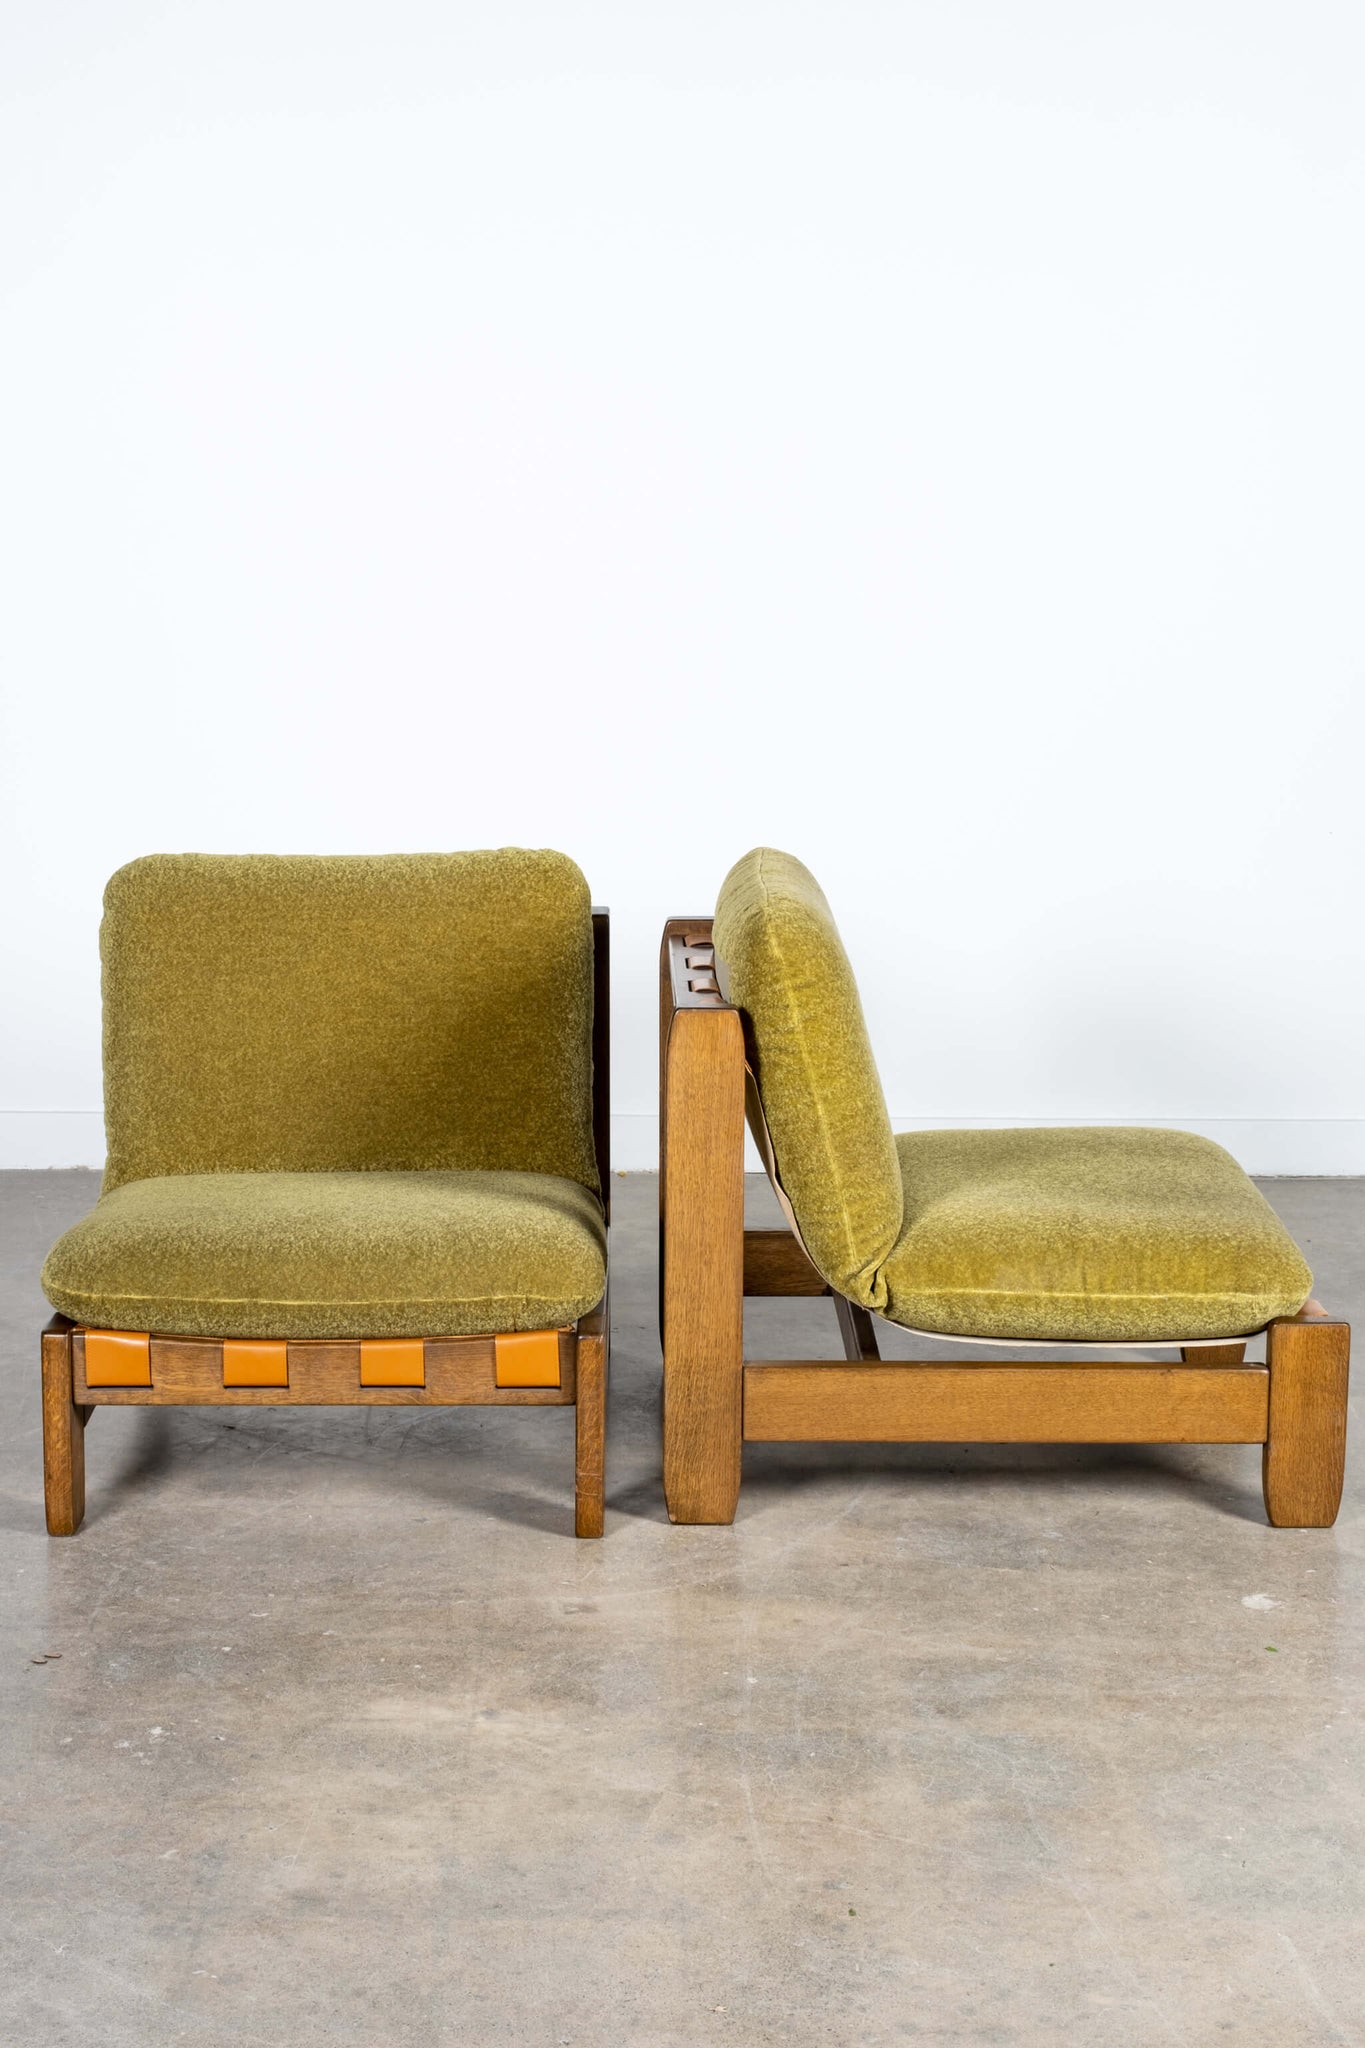 Vintage Pair of Green Sling Seat Chairs with Original Wool Fabric, front and side view